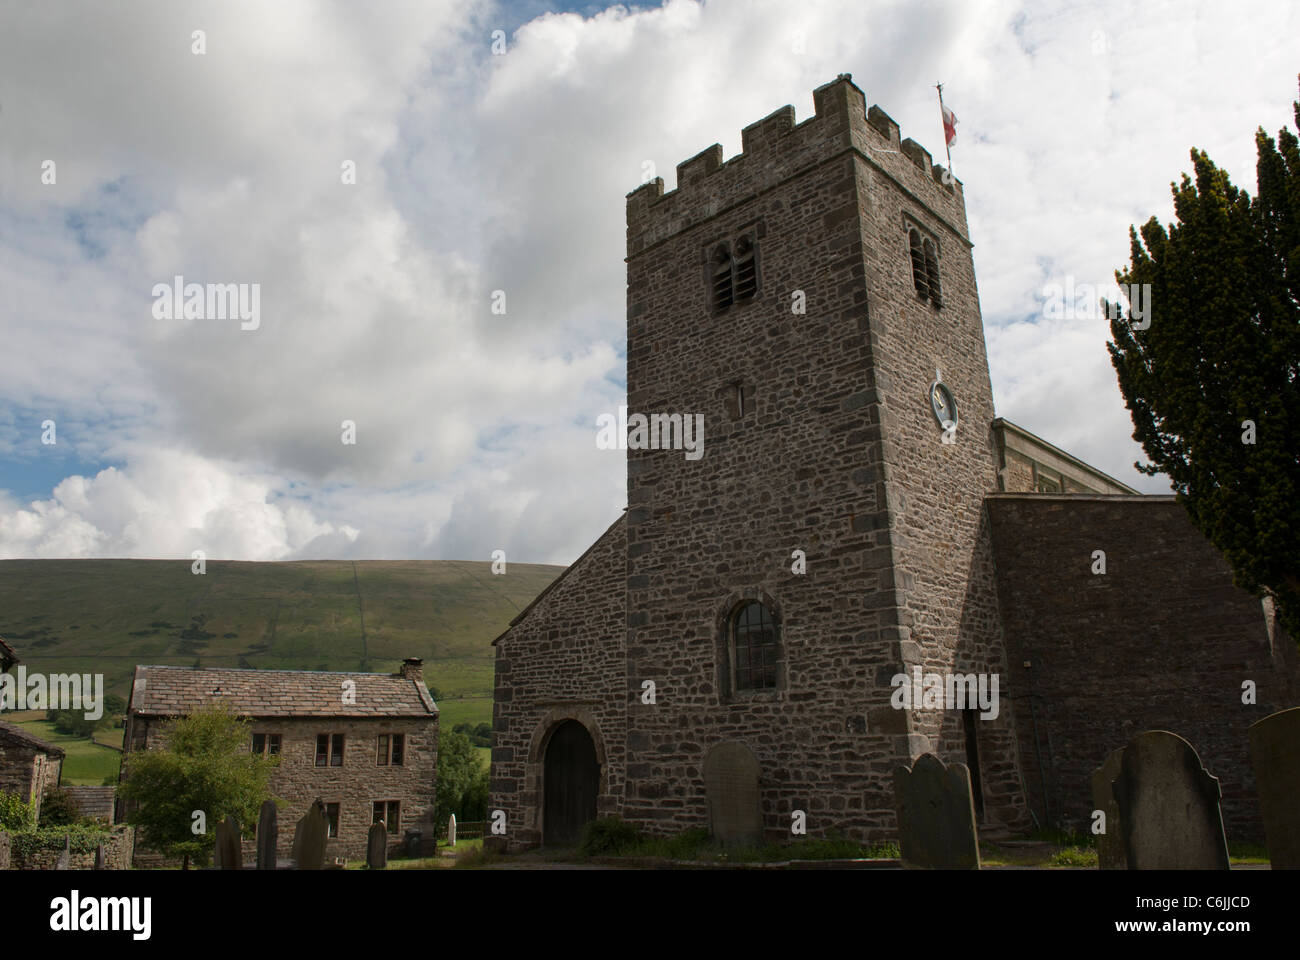 Parish Church of St Andrew, Dent, Dentdale, North Yorkshire, England. Stock Photo